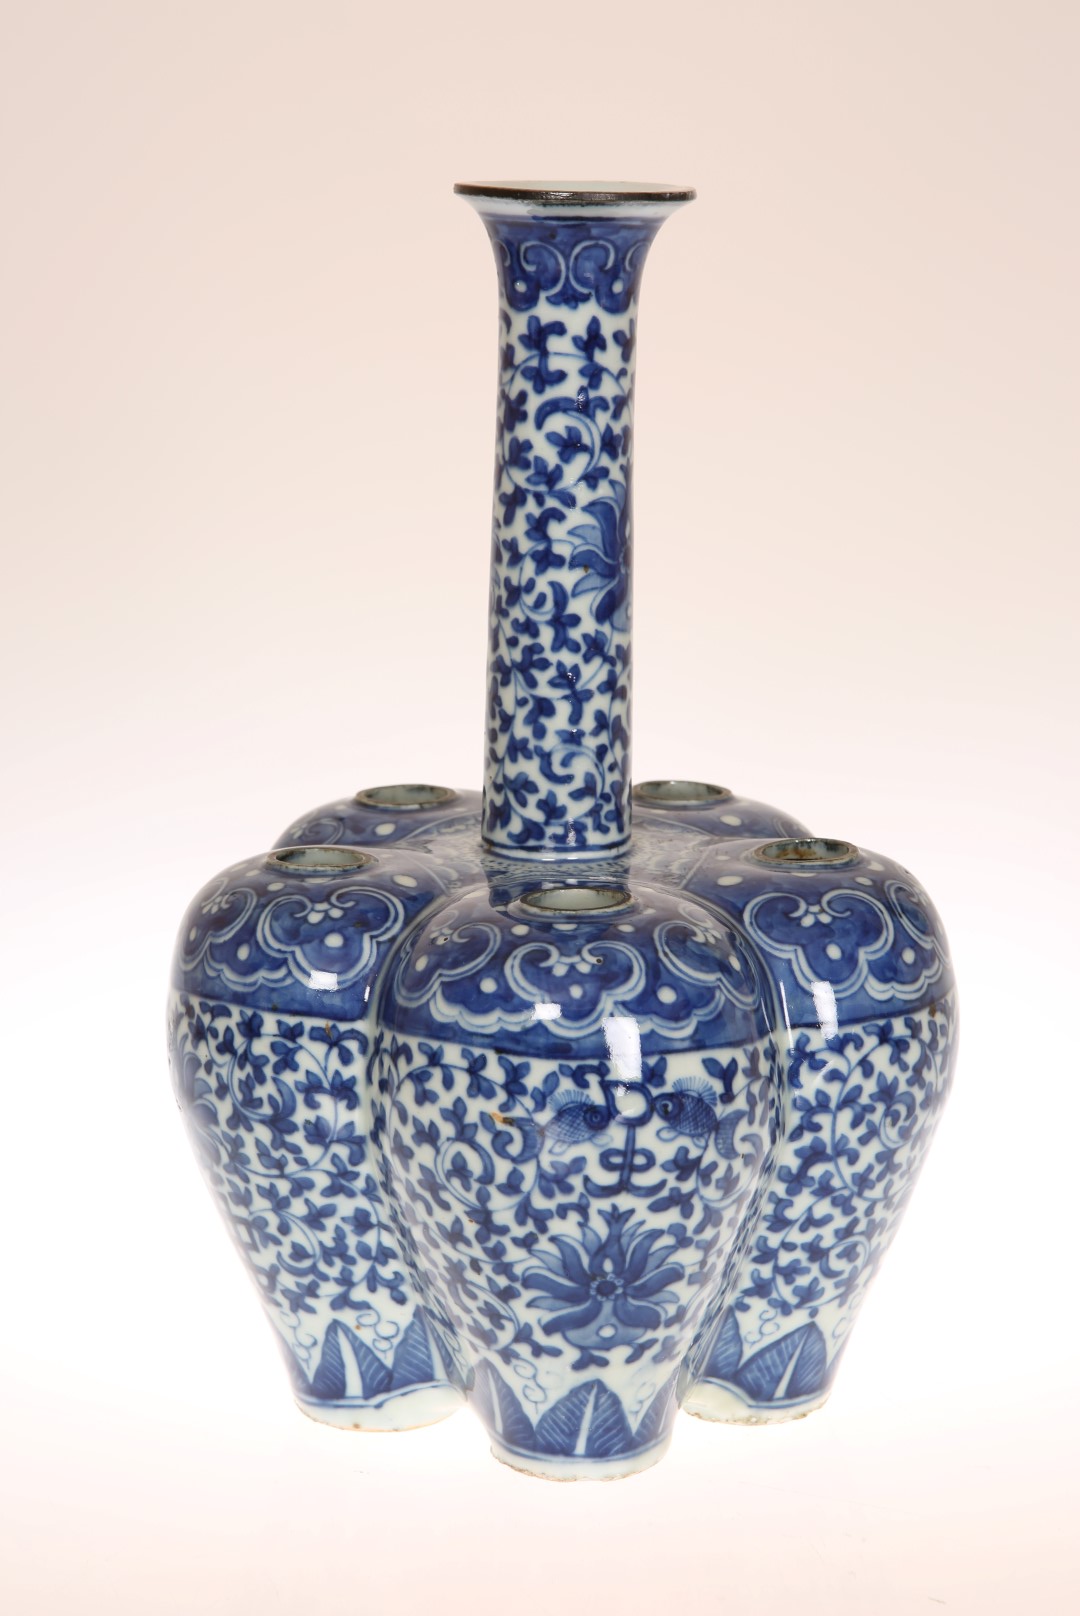 A CHINESE BLUE AND WHITE CROCUS VASE, probably 19th Century, painted with formal scrolling lotus.